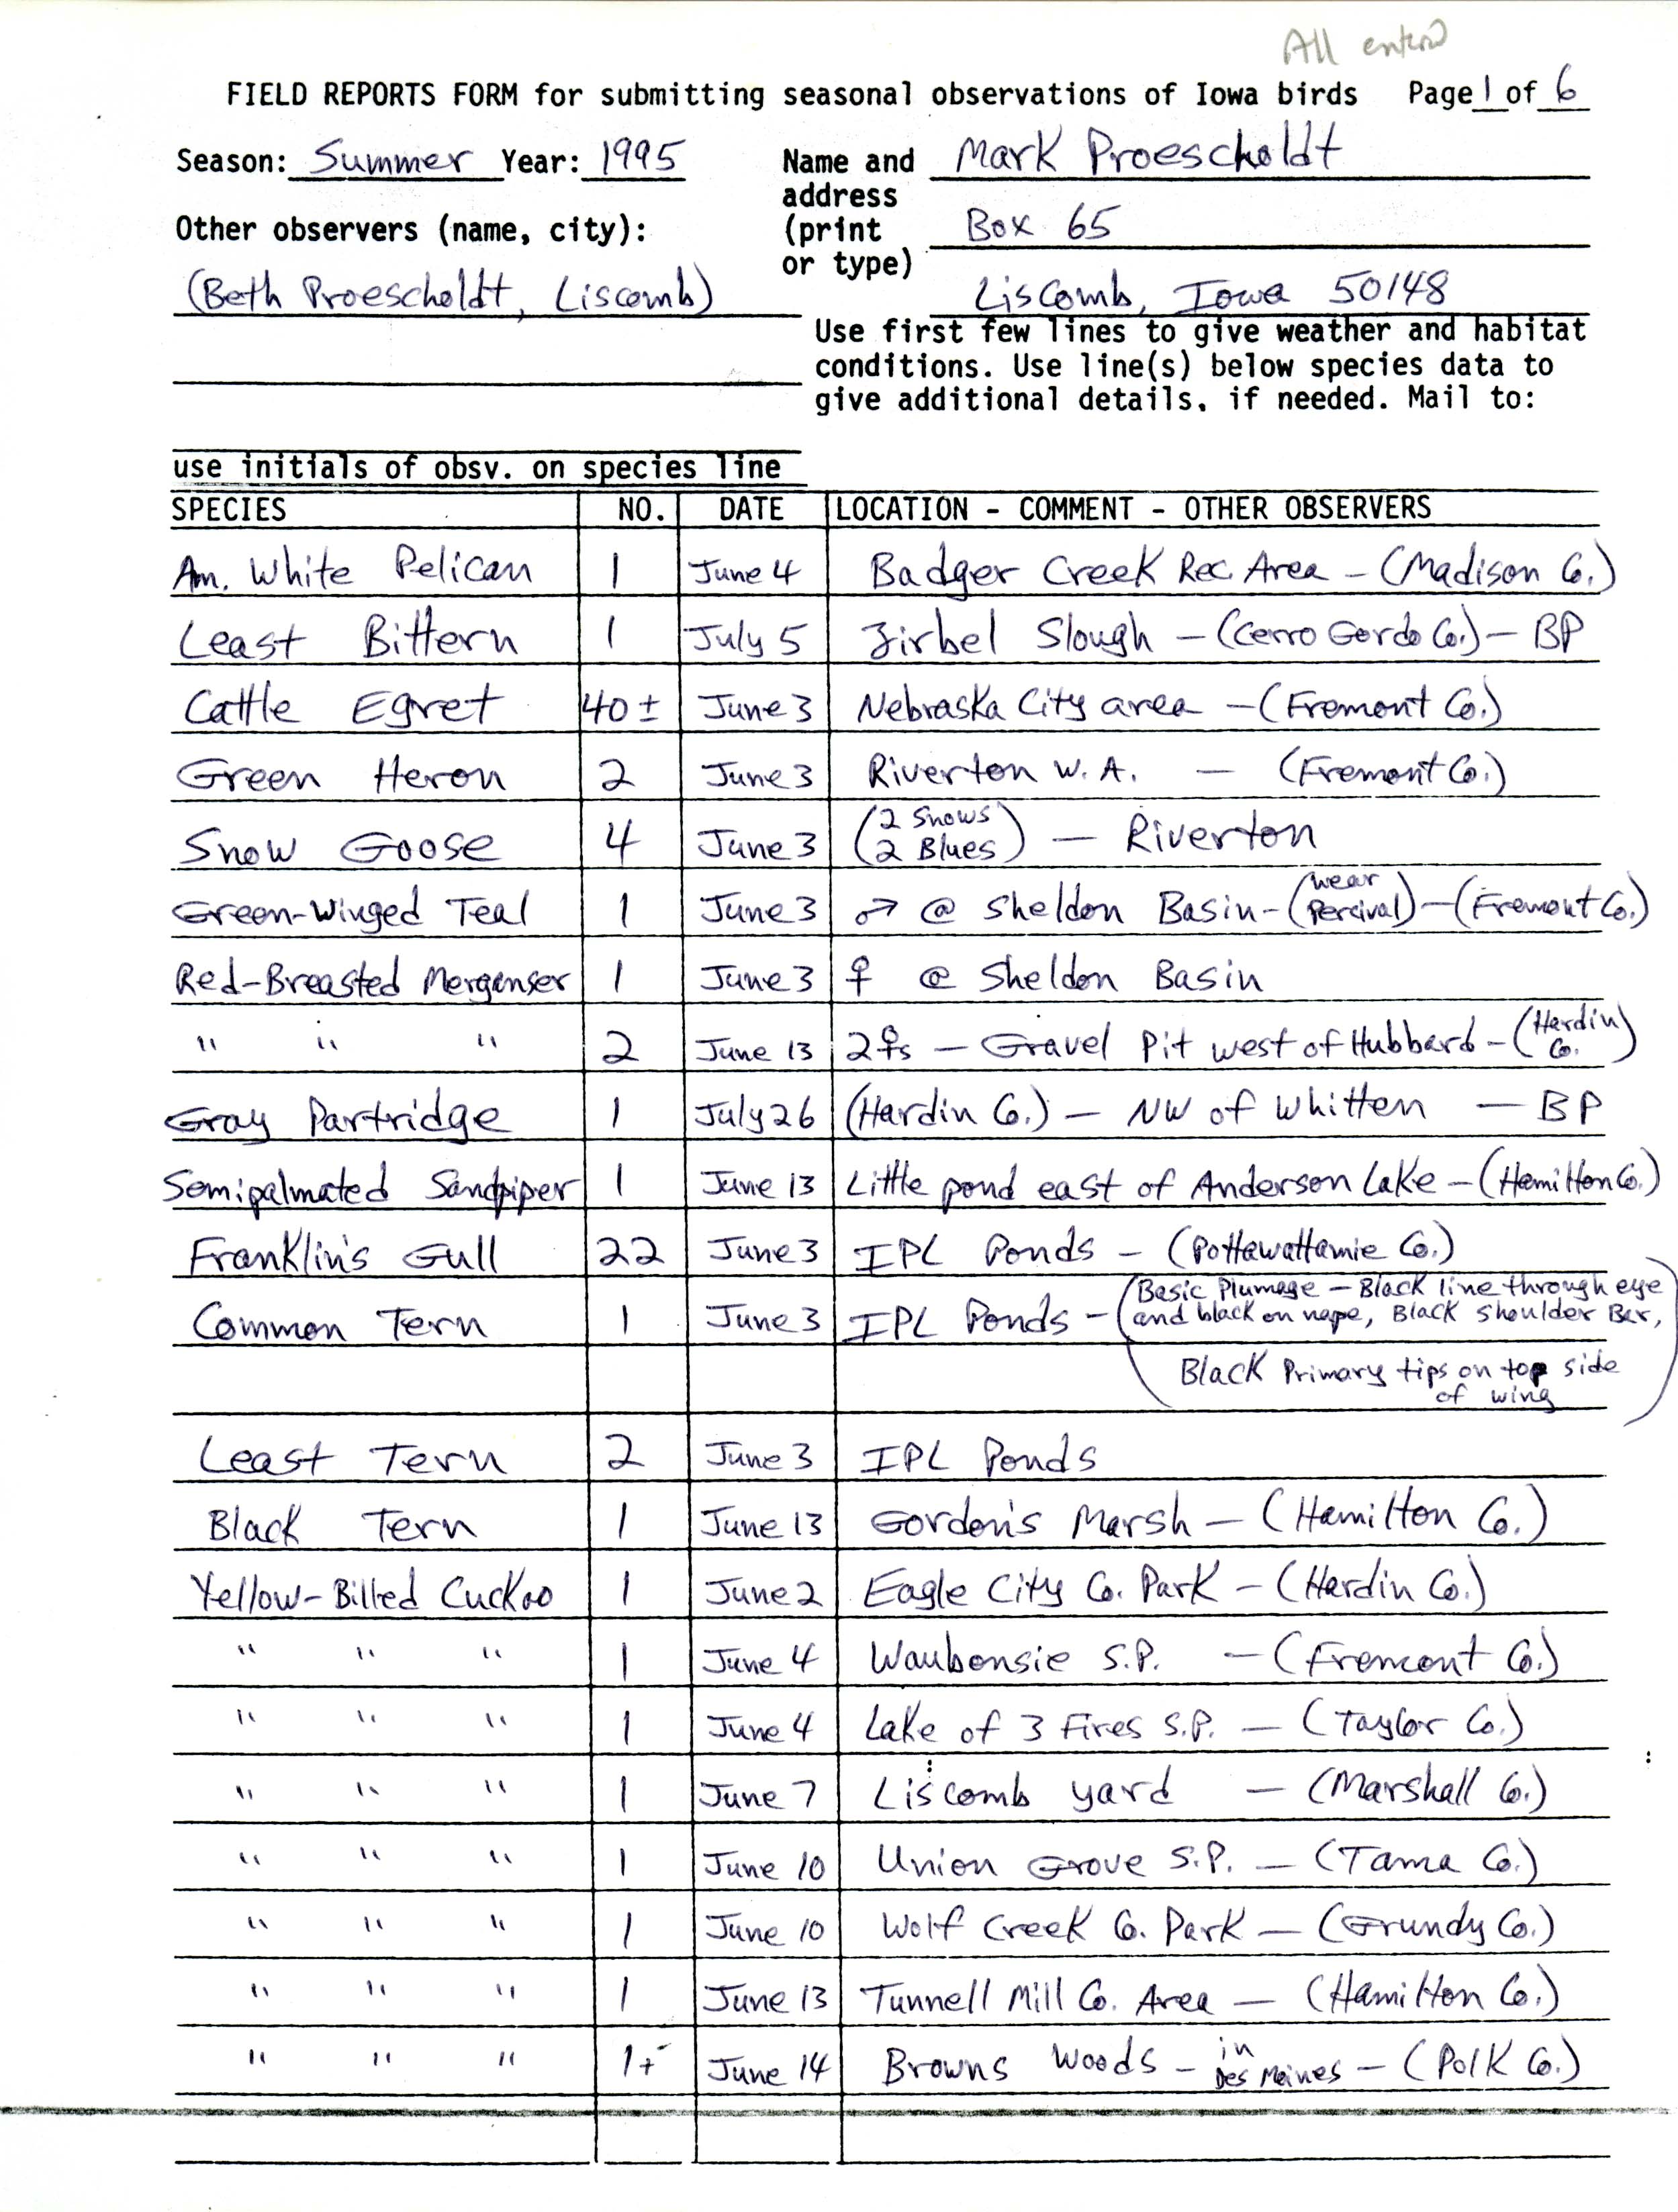 Field reports form for submitting seasonal observations of Iowa birds, summer 1995, Mark Proescholdt